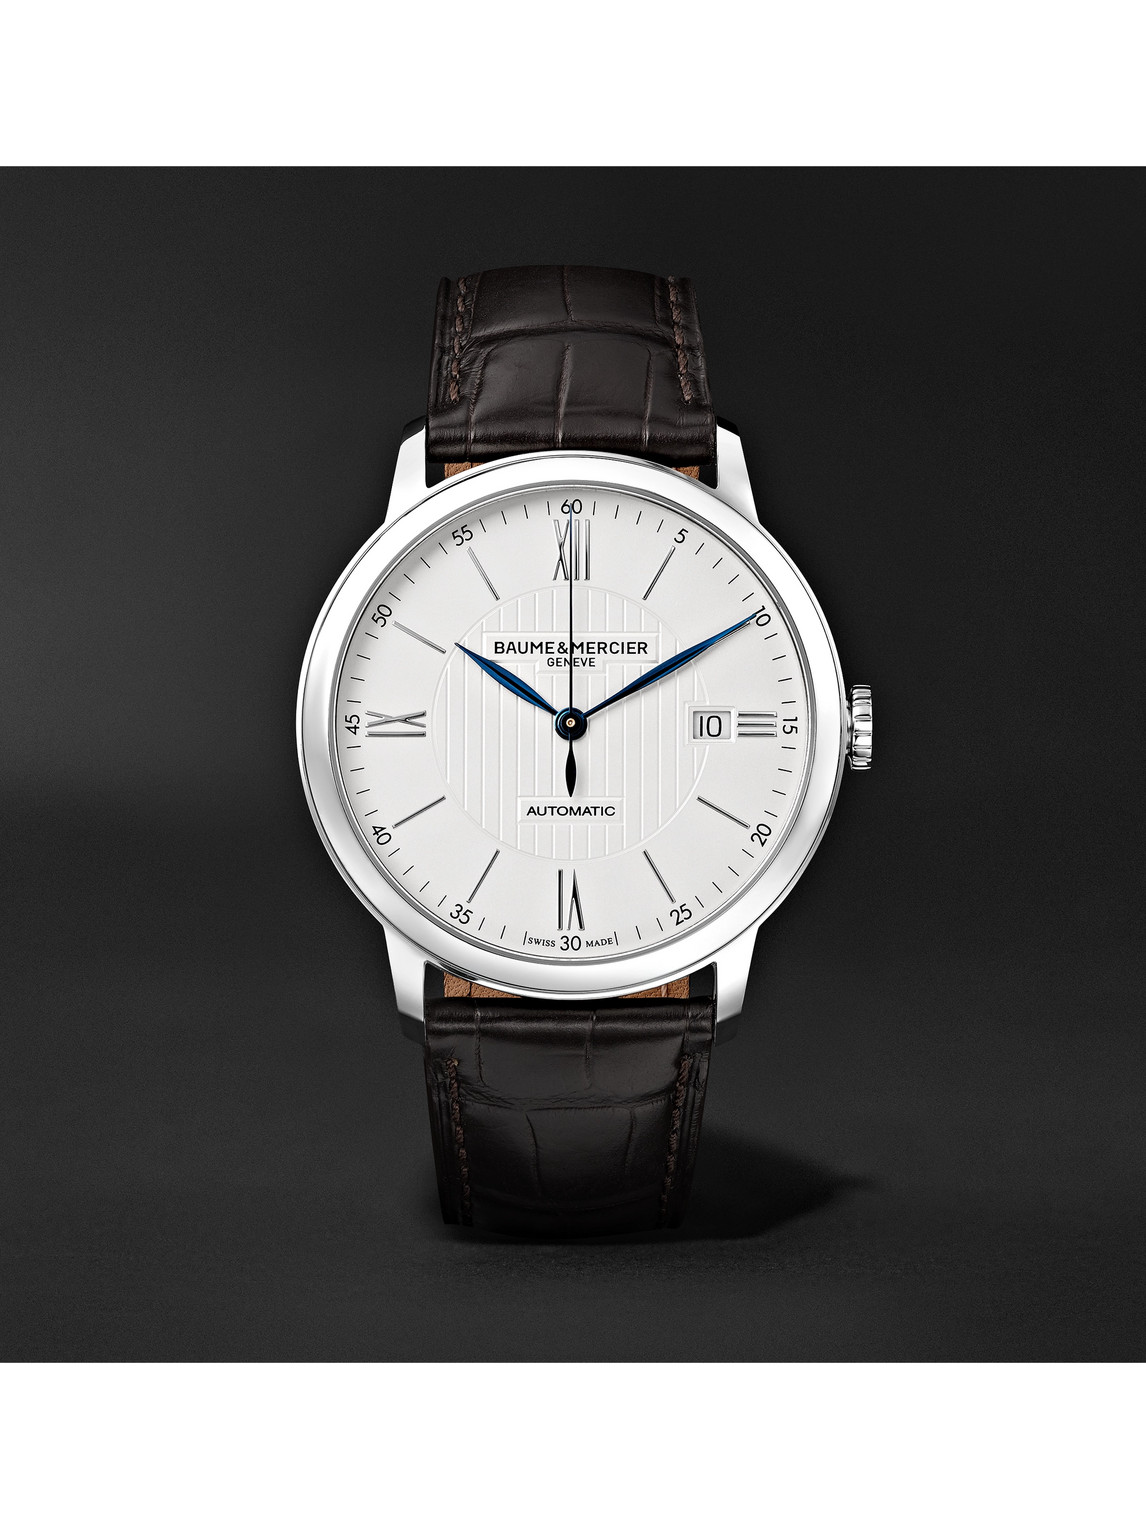 Baume & Mercier Classima Automatic 40mm Stainless Steel And Alligator Watch, Ref. No. 10214 In White